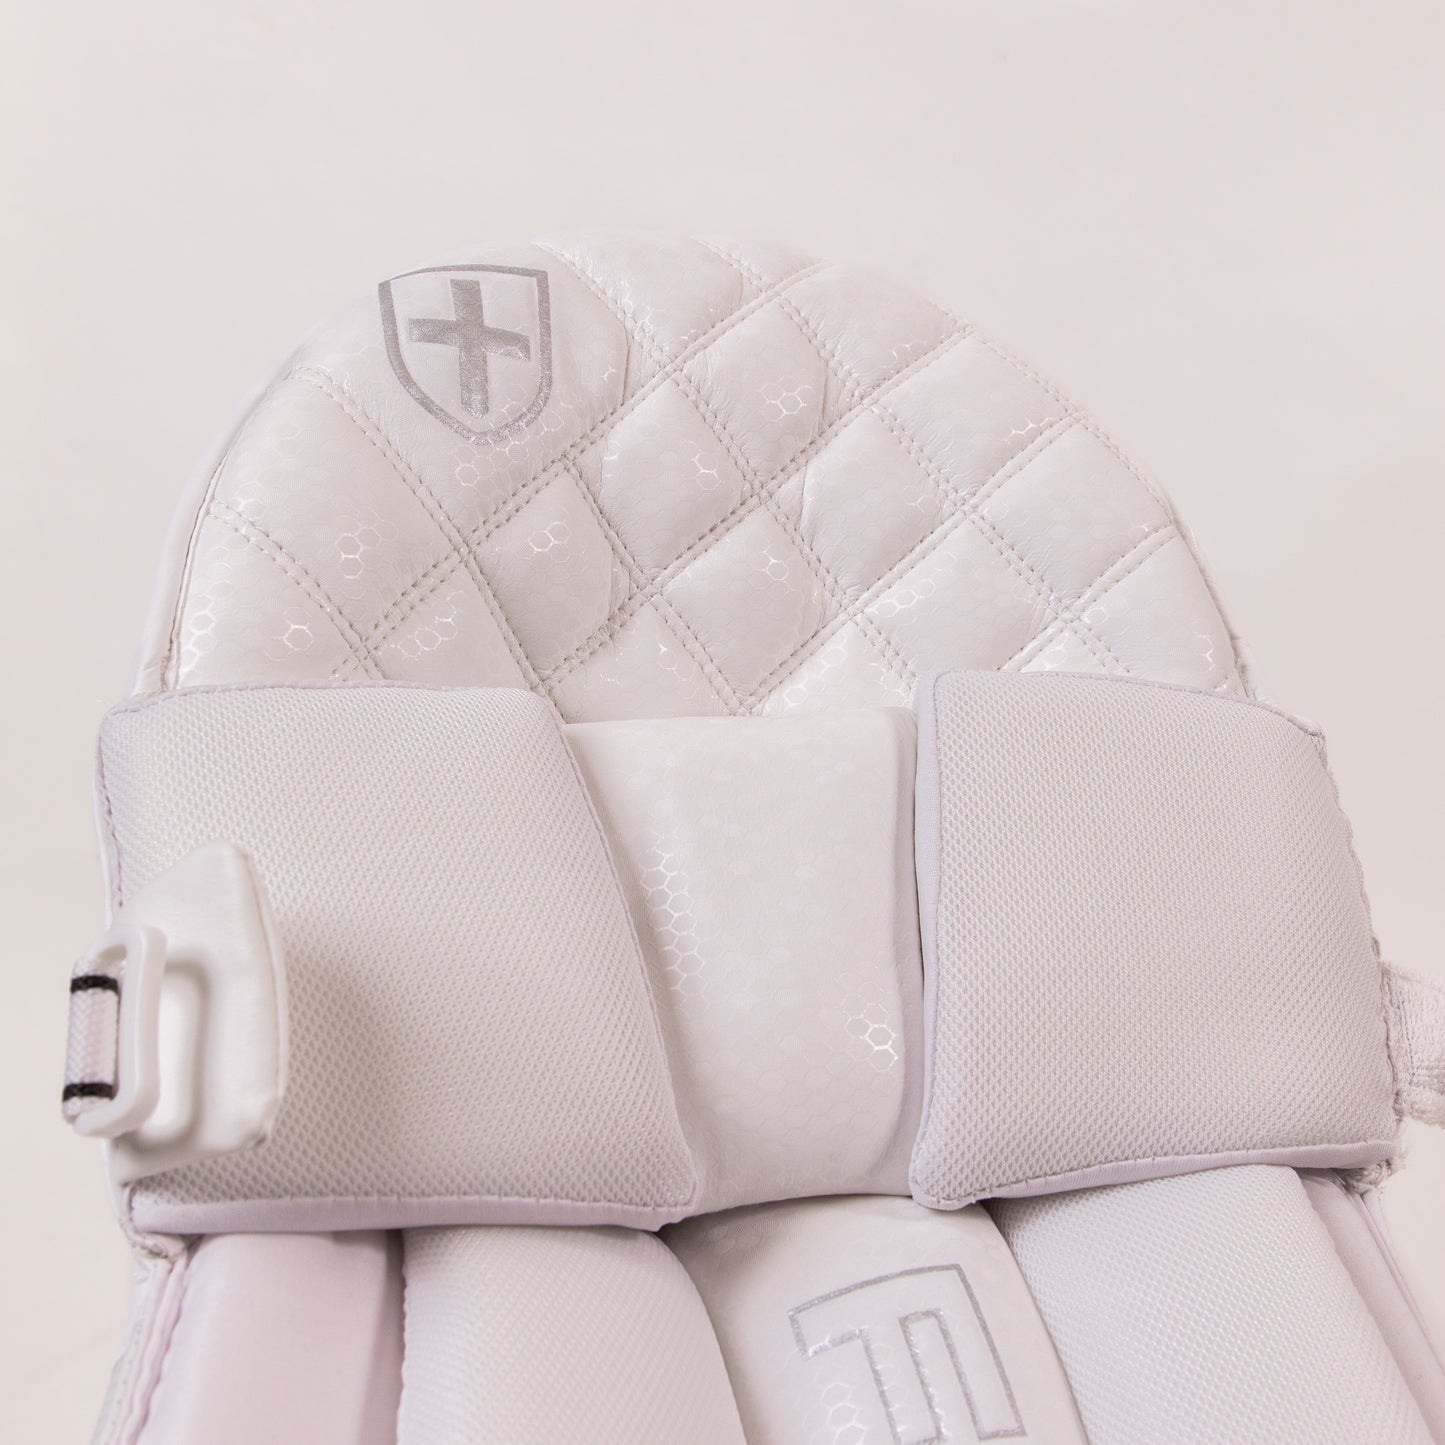 Limited Edition Womans Batting Pads